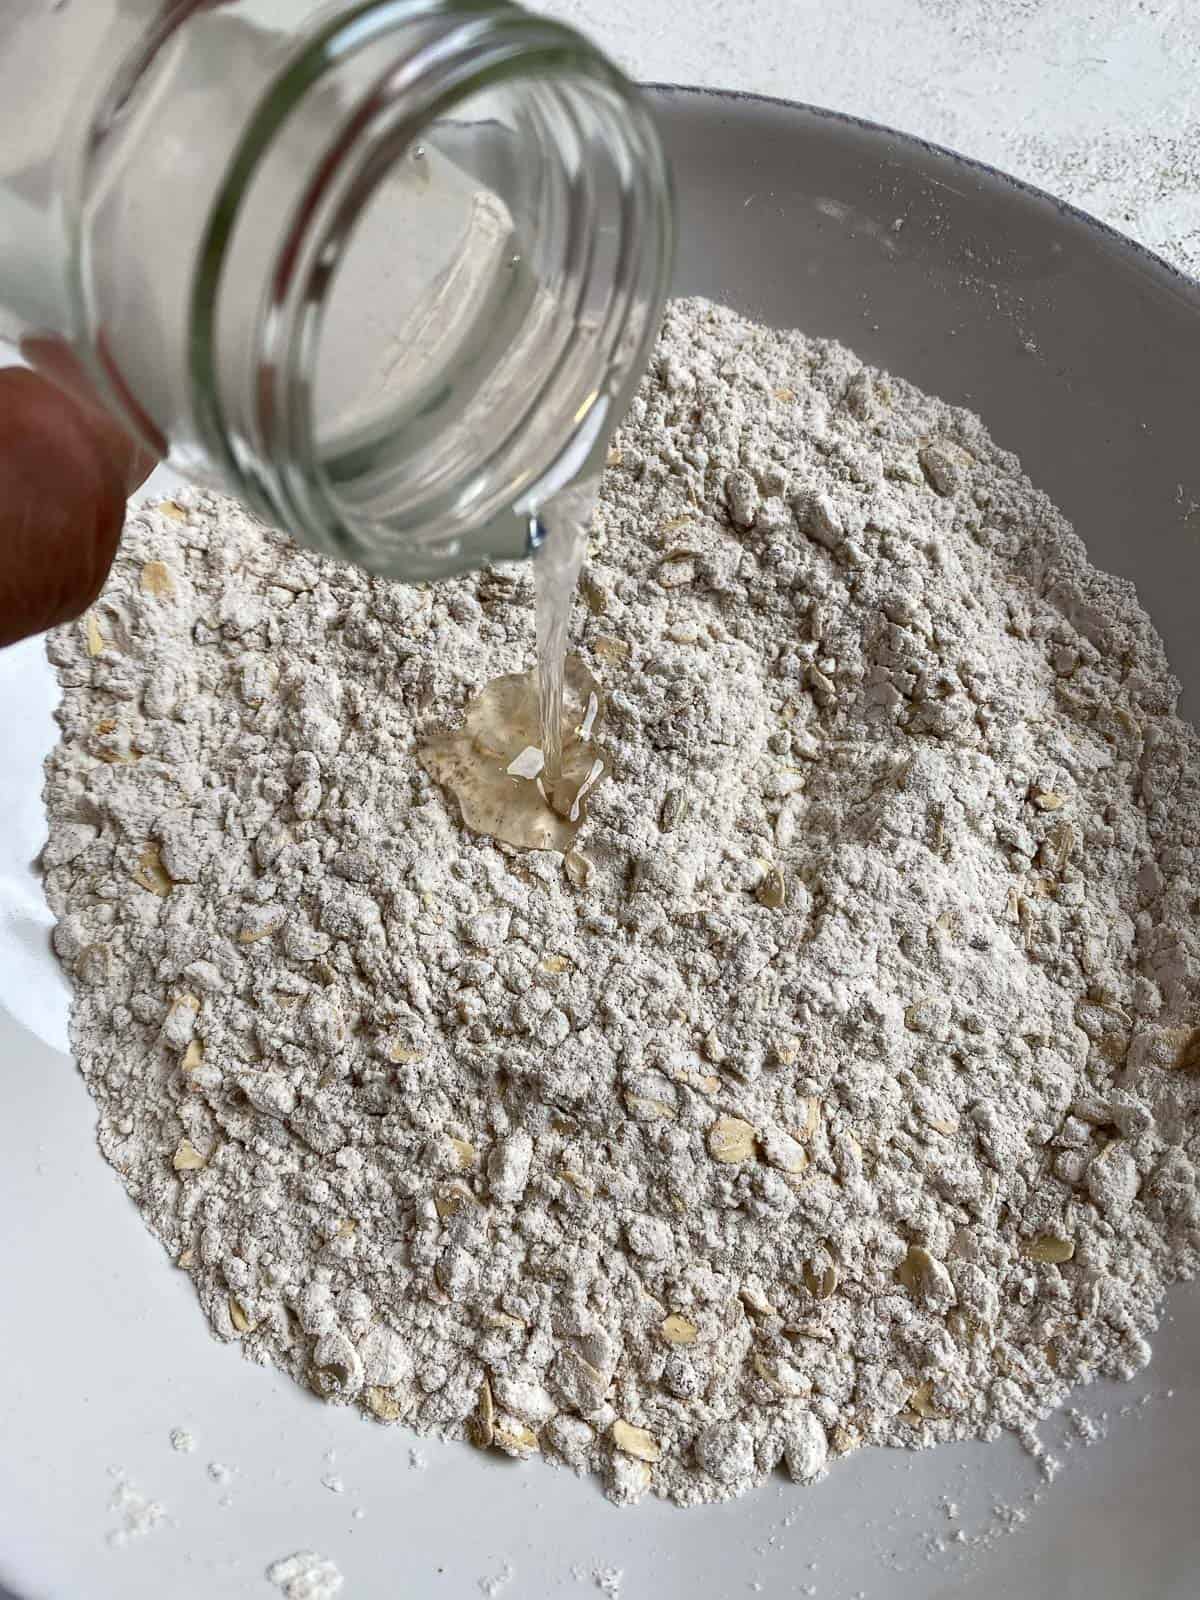 process of adding coconut oil to crumb topping mixture in bowl